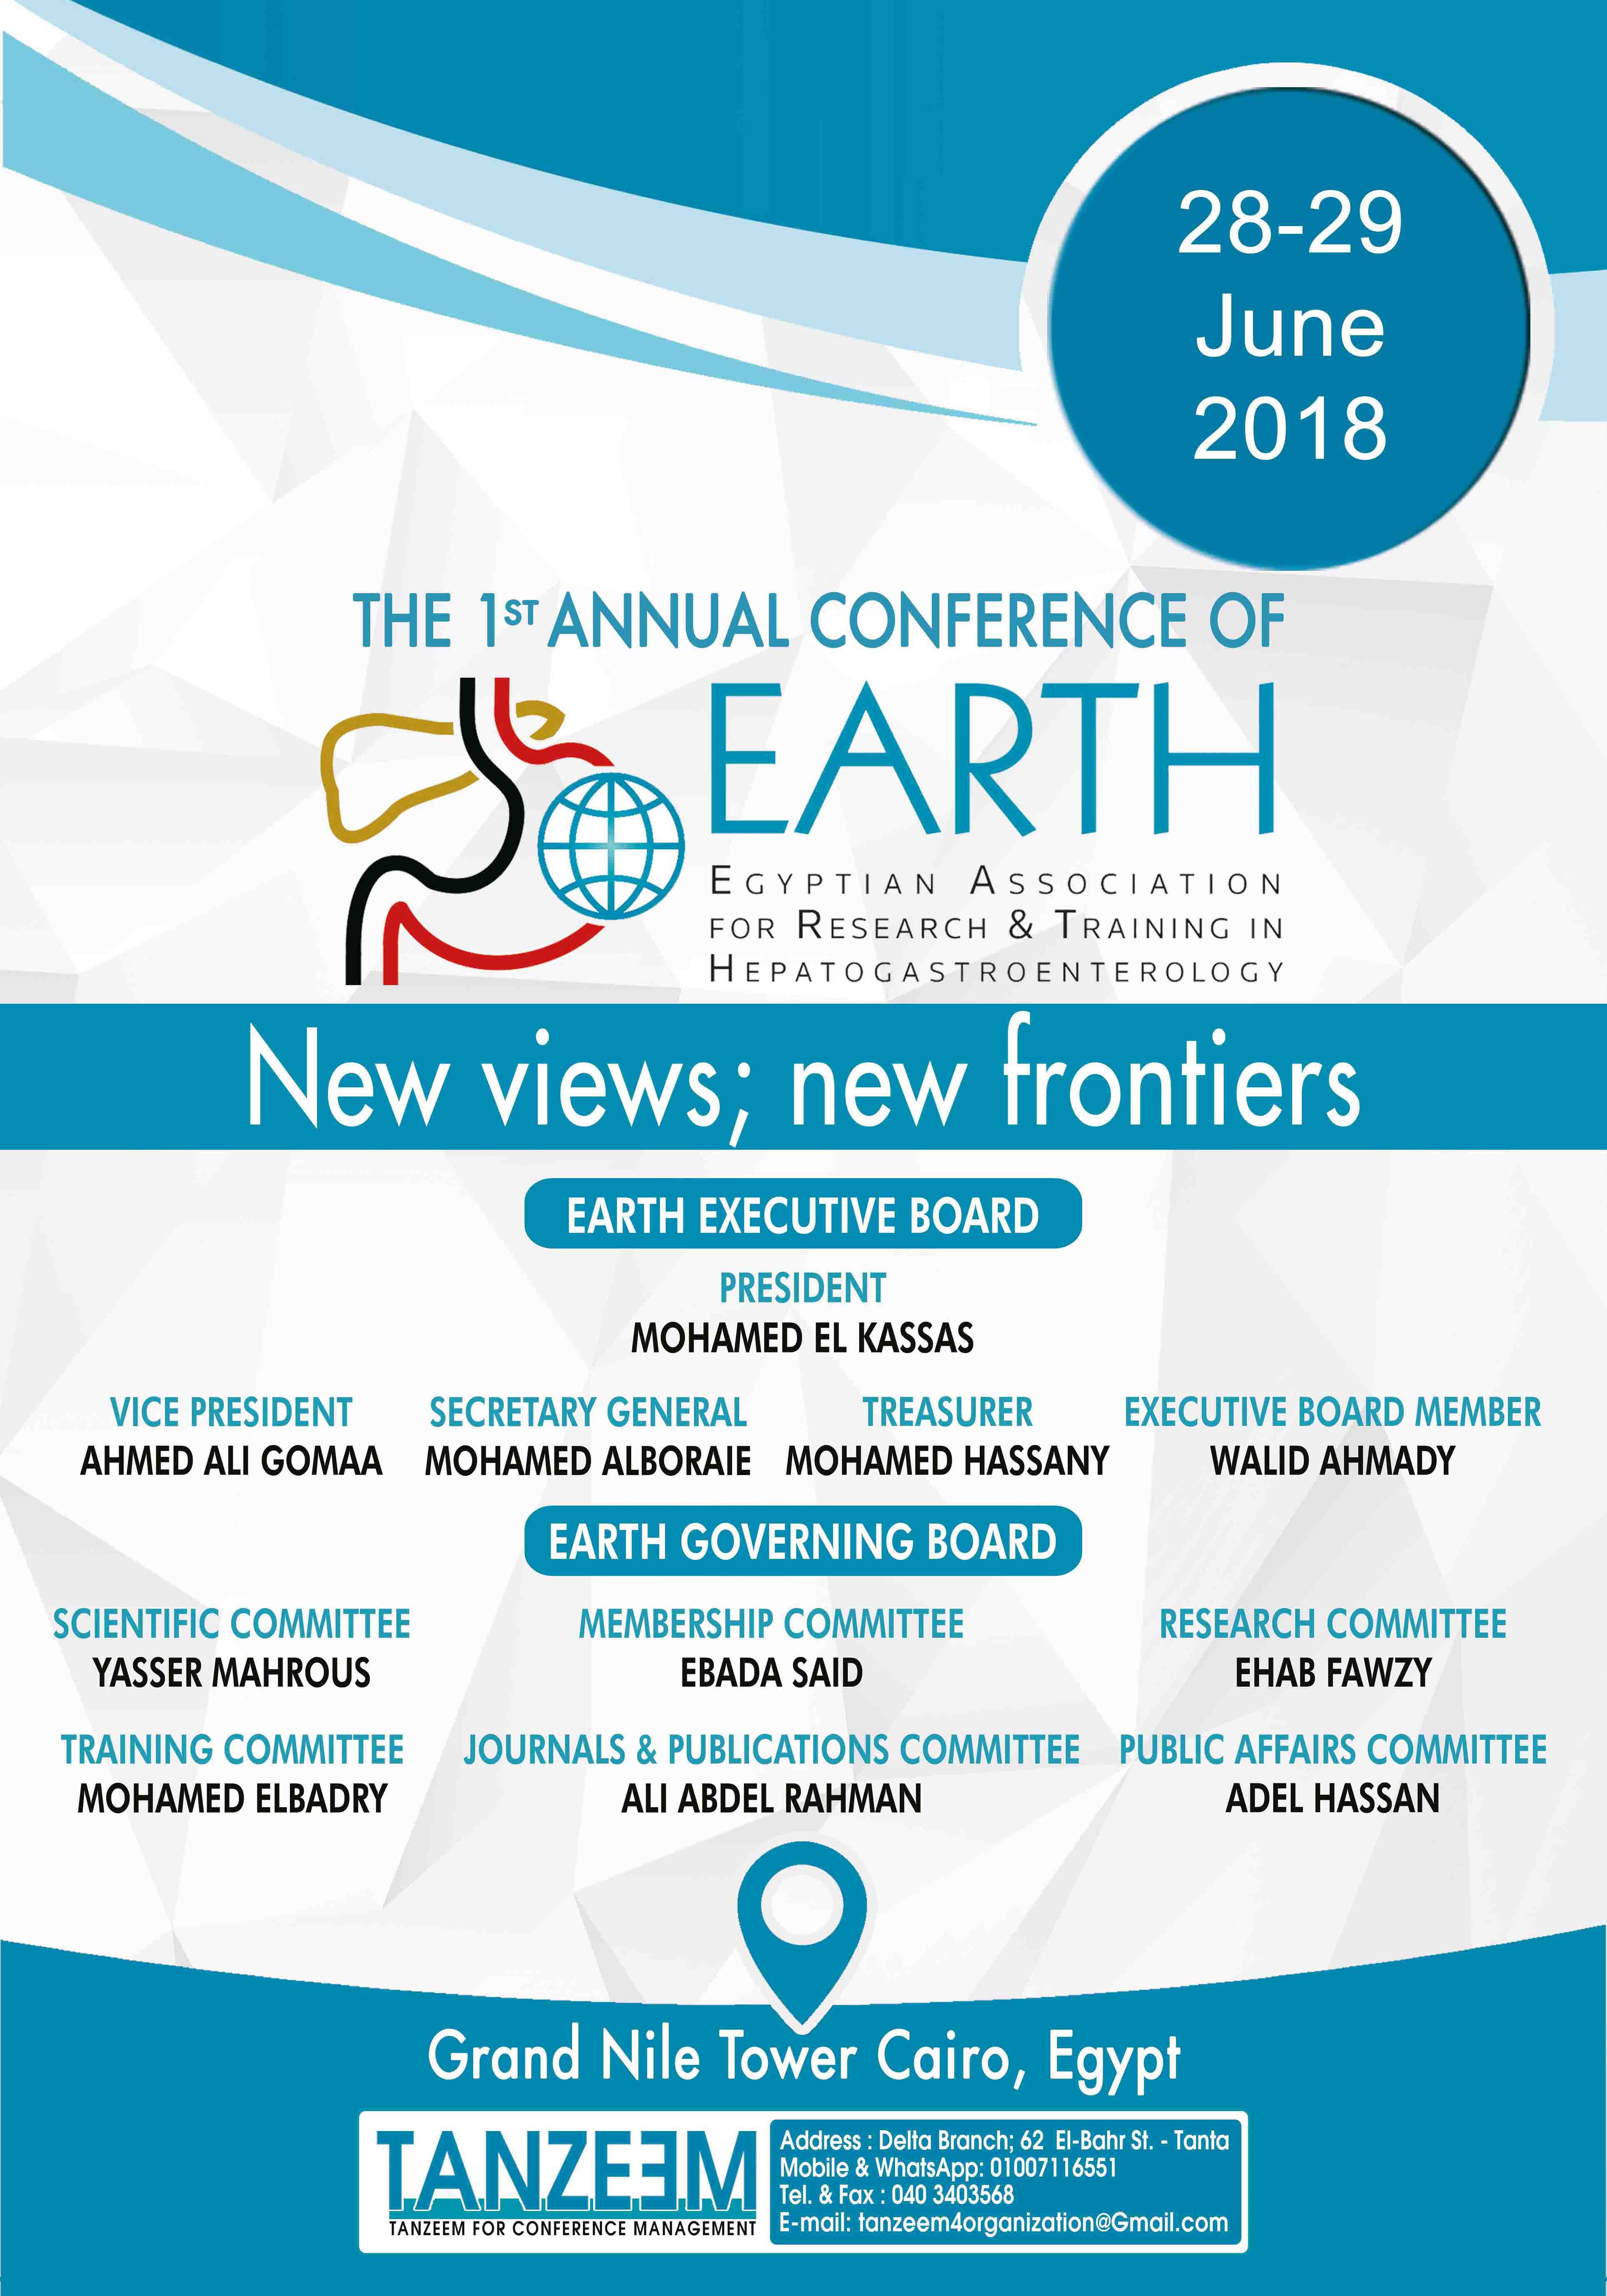 The 1st Annual Conference EARTH